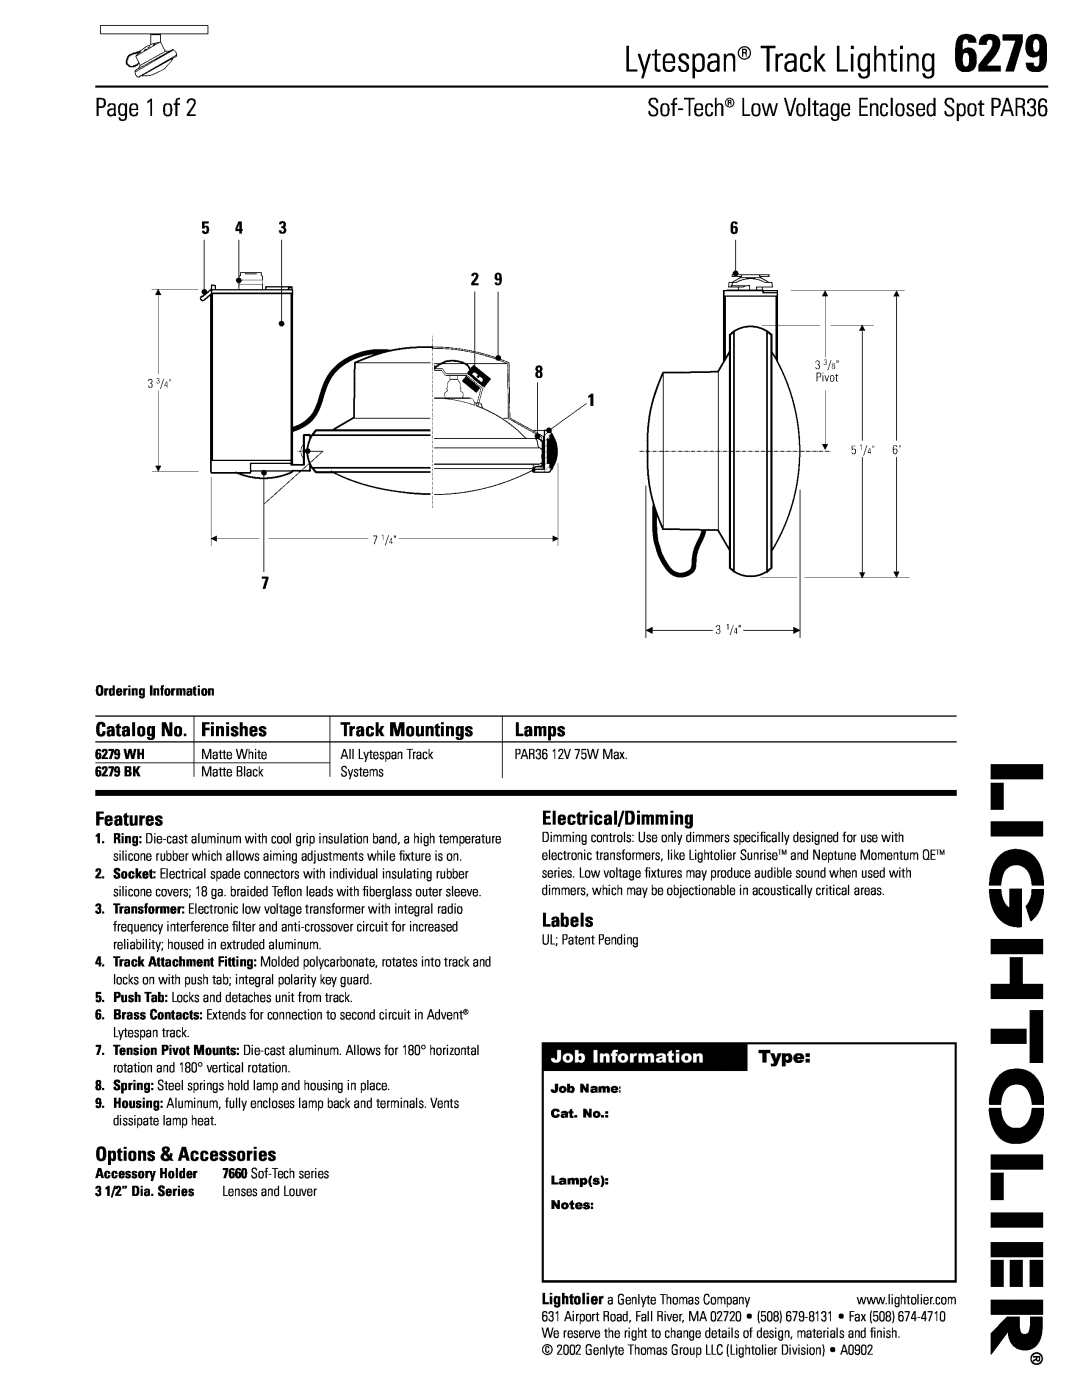 Lightolier 6279 manual Lytespan Track Lighting, Page 1 of, Finishes, Track Mountings, Lamps, Features, Electrical/Dimming 